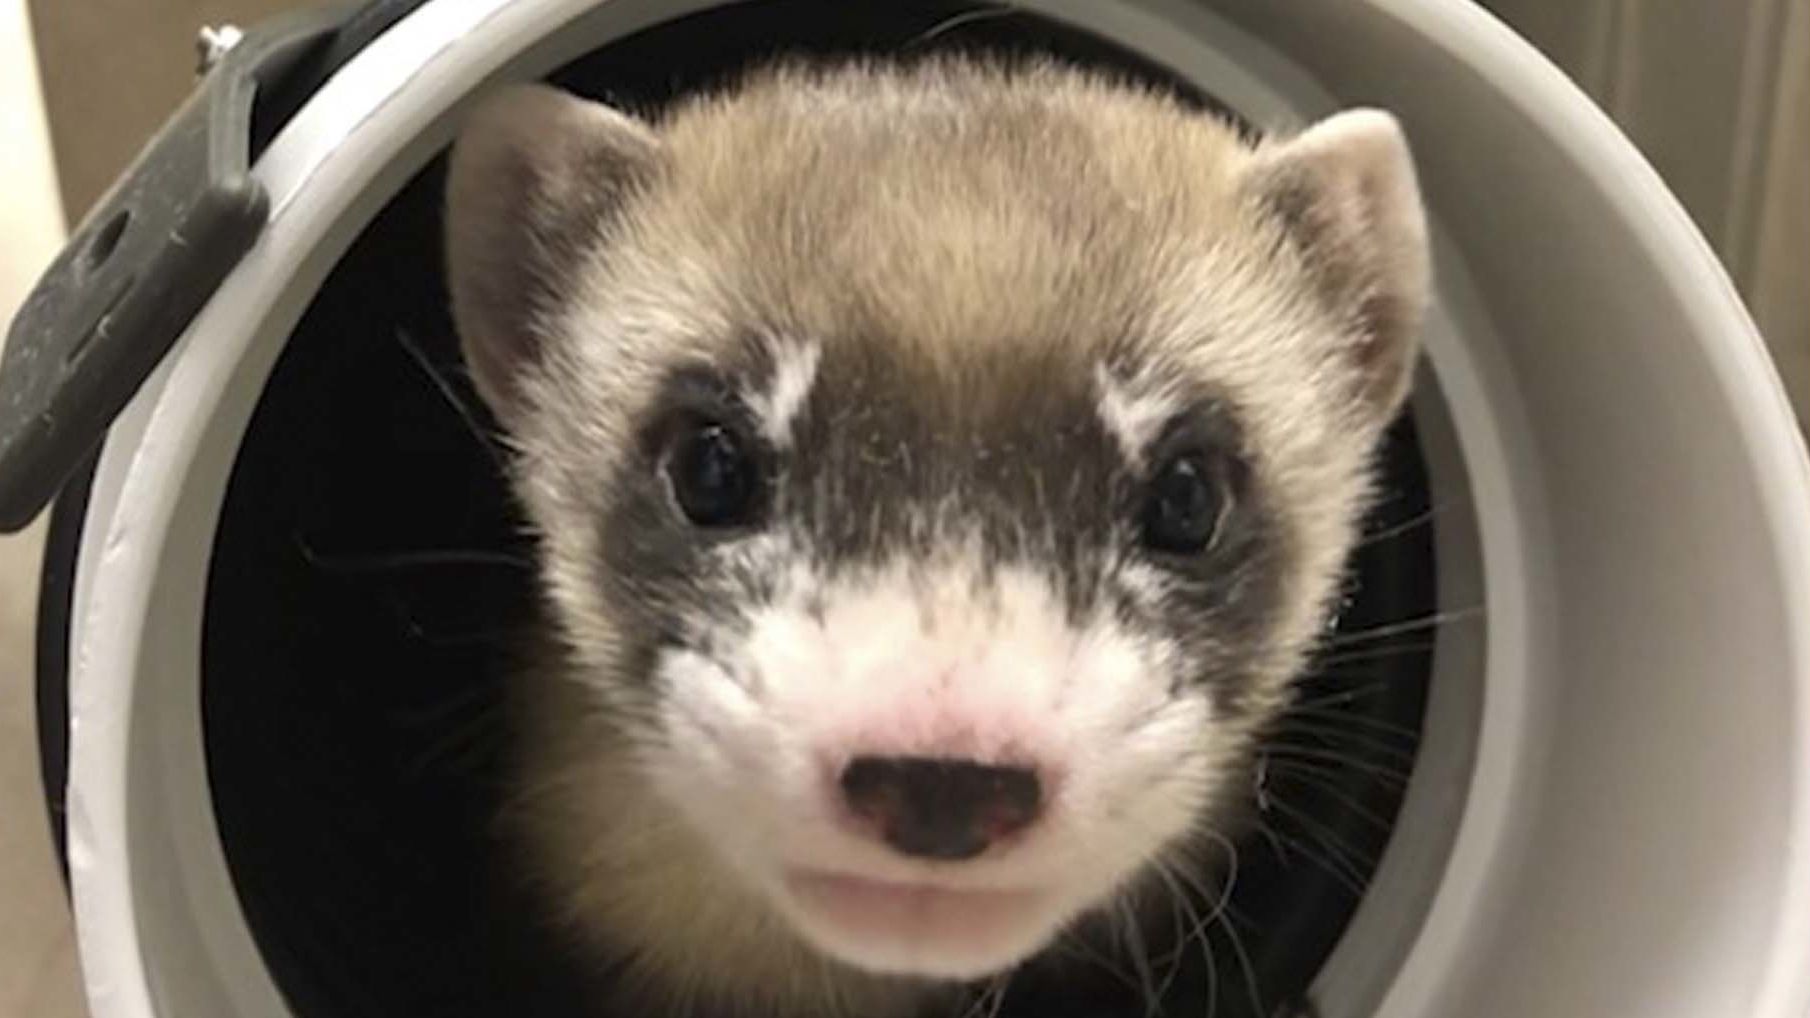 In this photo provided by the U.S. Fish and Wildlife Service is Elizabeth Ann, the first cloned black-footed ferret and first-ever cloned US endangered species, at 50-days old on Jan. 29, 2021. Scientists hope the slinky predator named Elizabeth Ann and her descendants will improve the genetic diversity of a species once thought extinct but bred in captivity and reintroduced successfully to the wild. (U.S. Fish and Wildlife Service via AP)